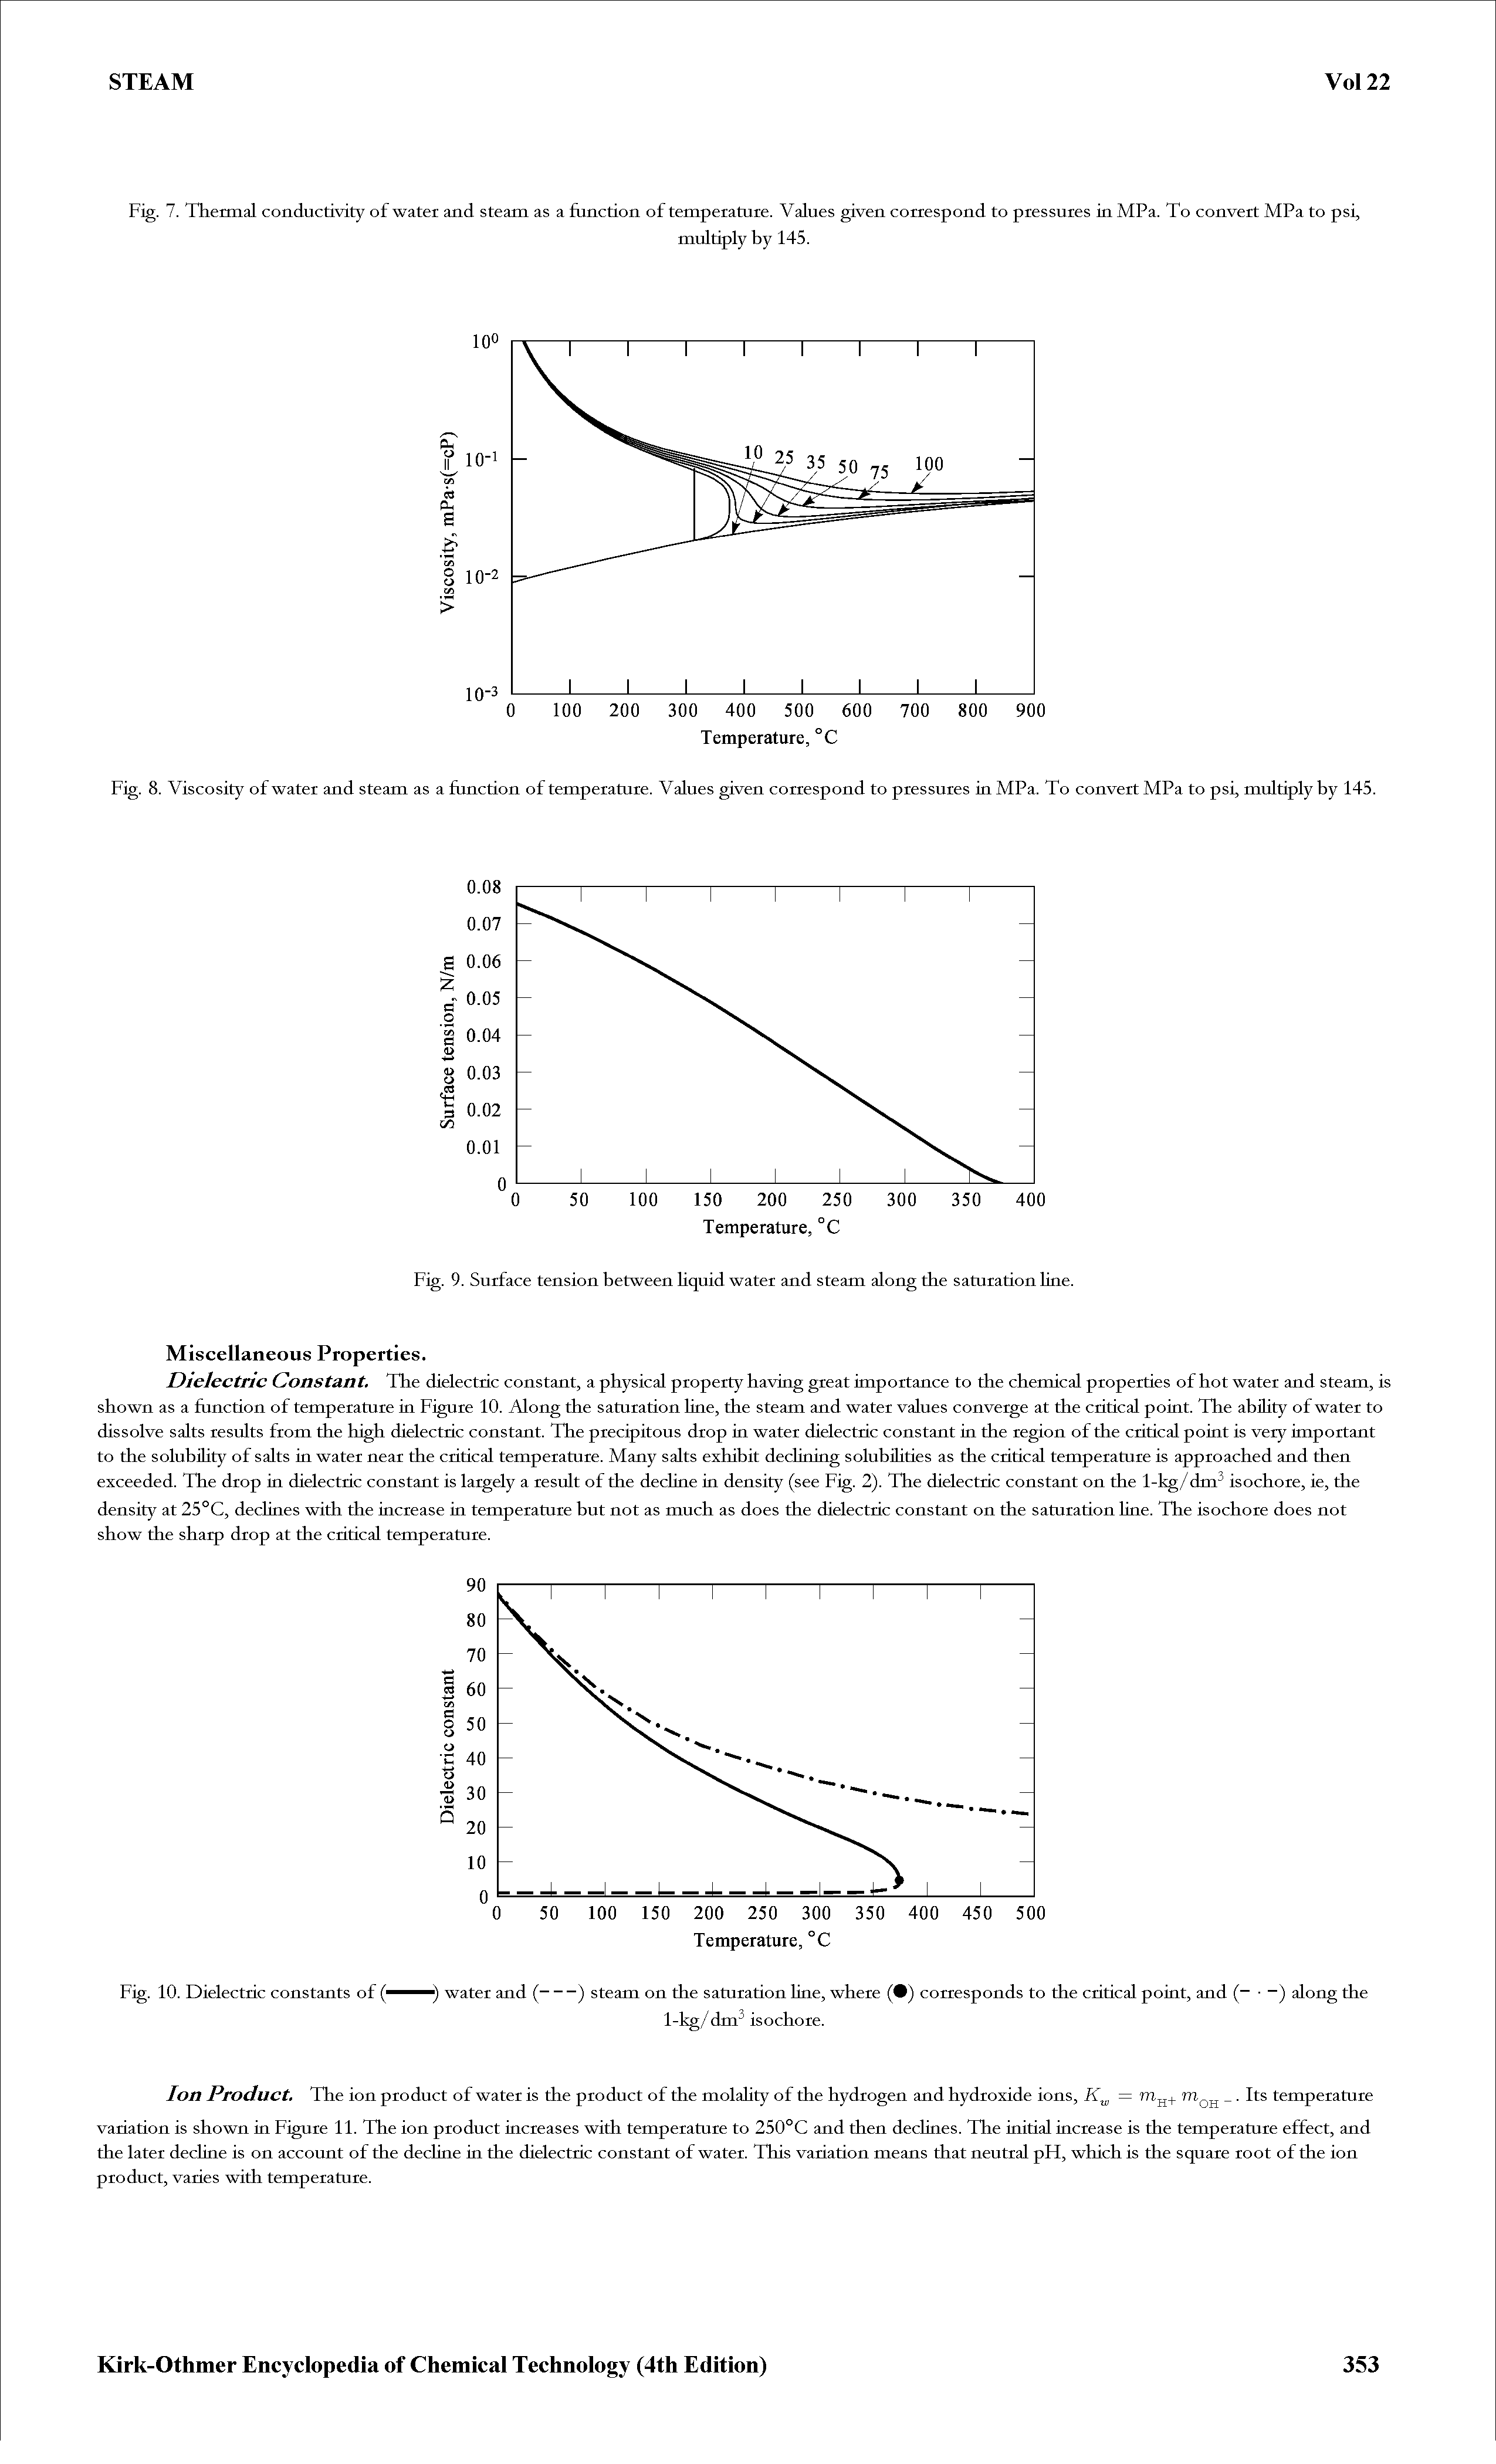 Fig. 8. Viscosity of water and steam as a function of temperature. Values given correspond to pressures in MPa. To convert MPa to psi, multiply by 145.